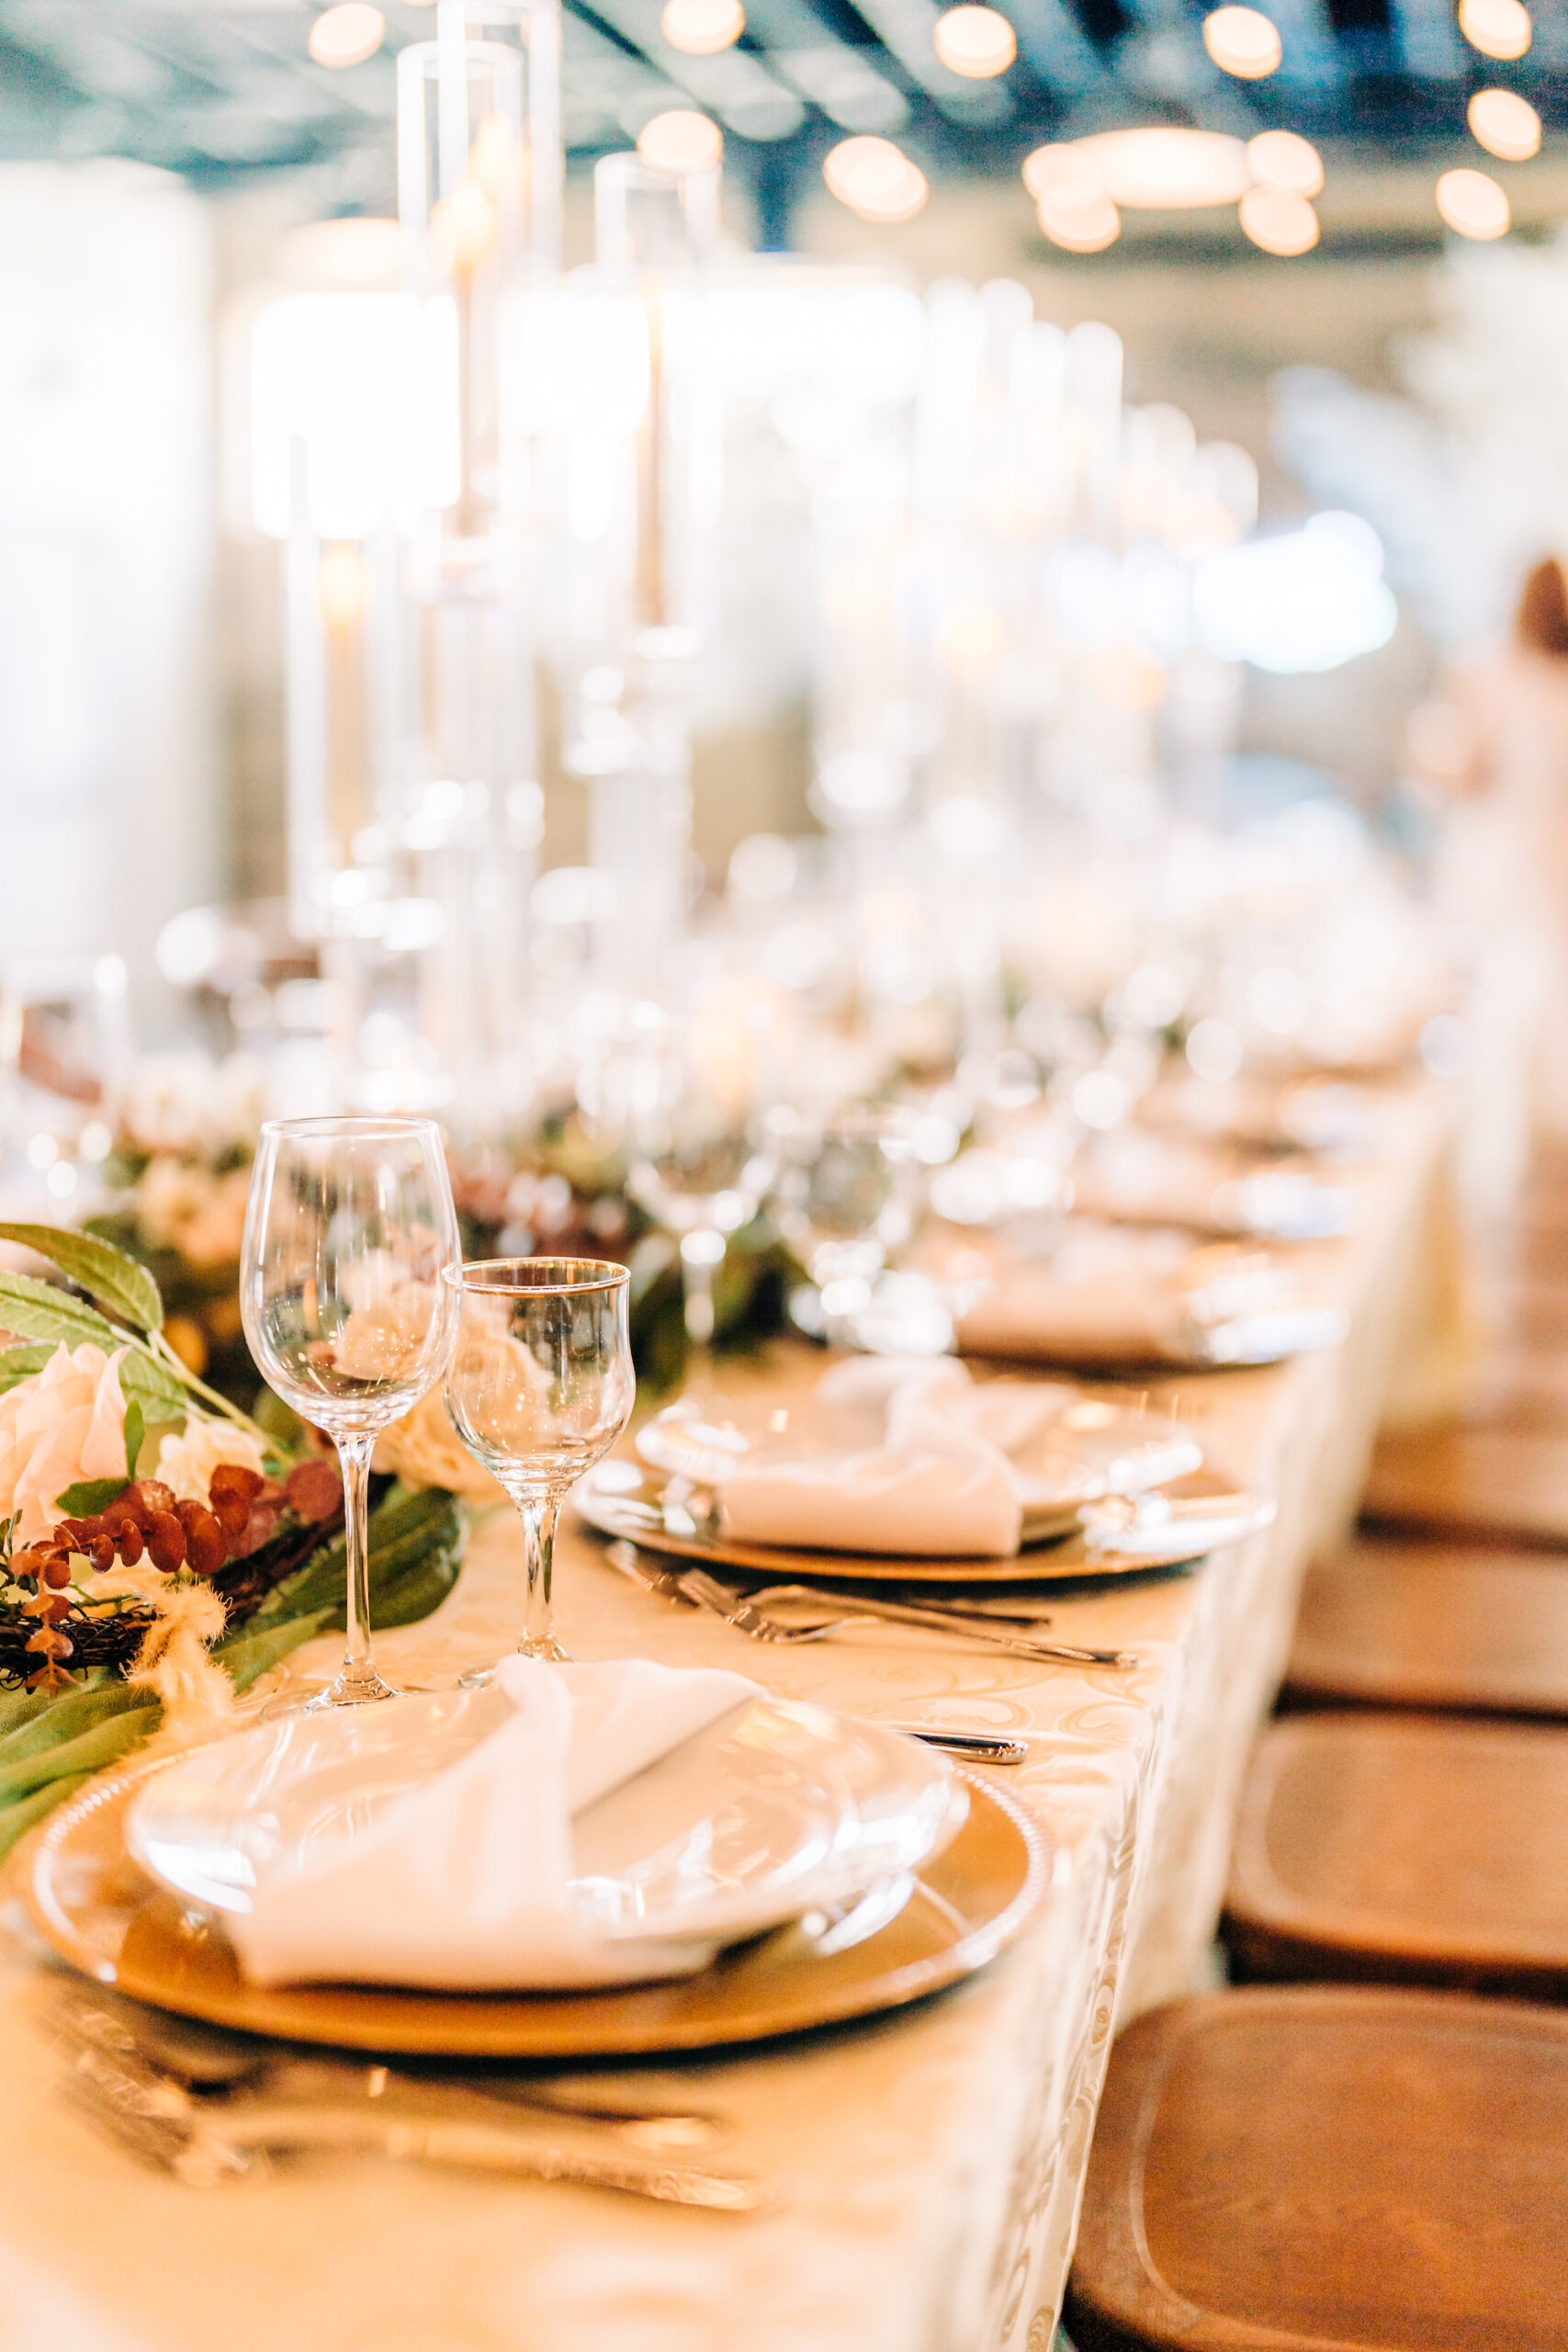 Gold Chargers and Flatware Table Setting Ideas | Elegant Wedding Tablescape Inspiration | Tampa Bay Rental Elite Events Catering